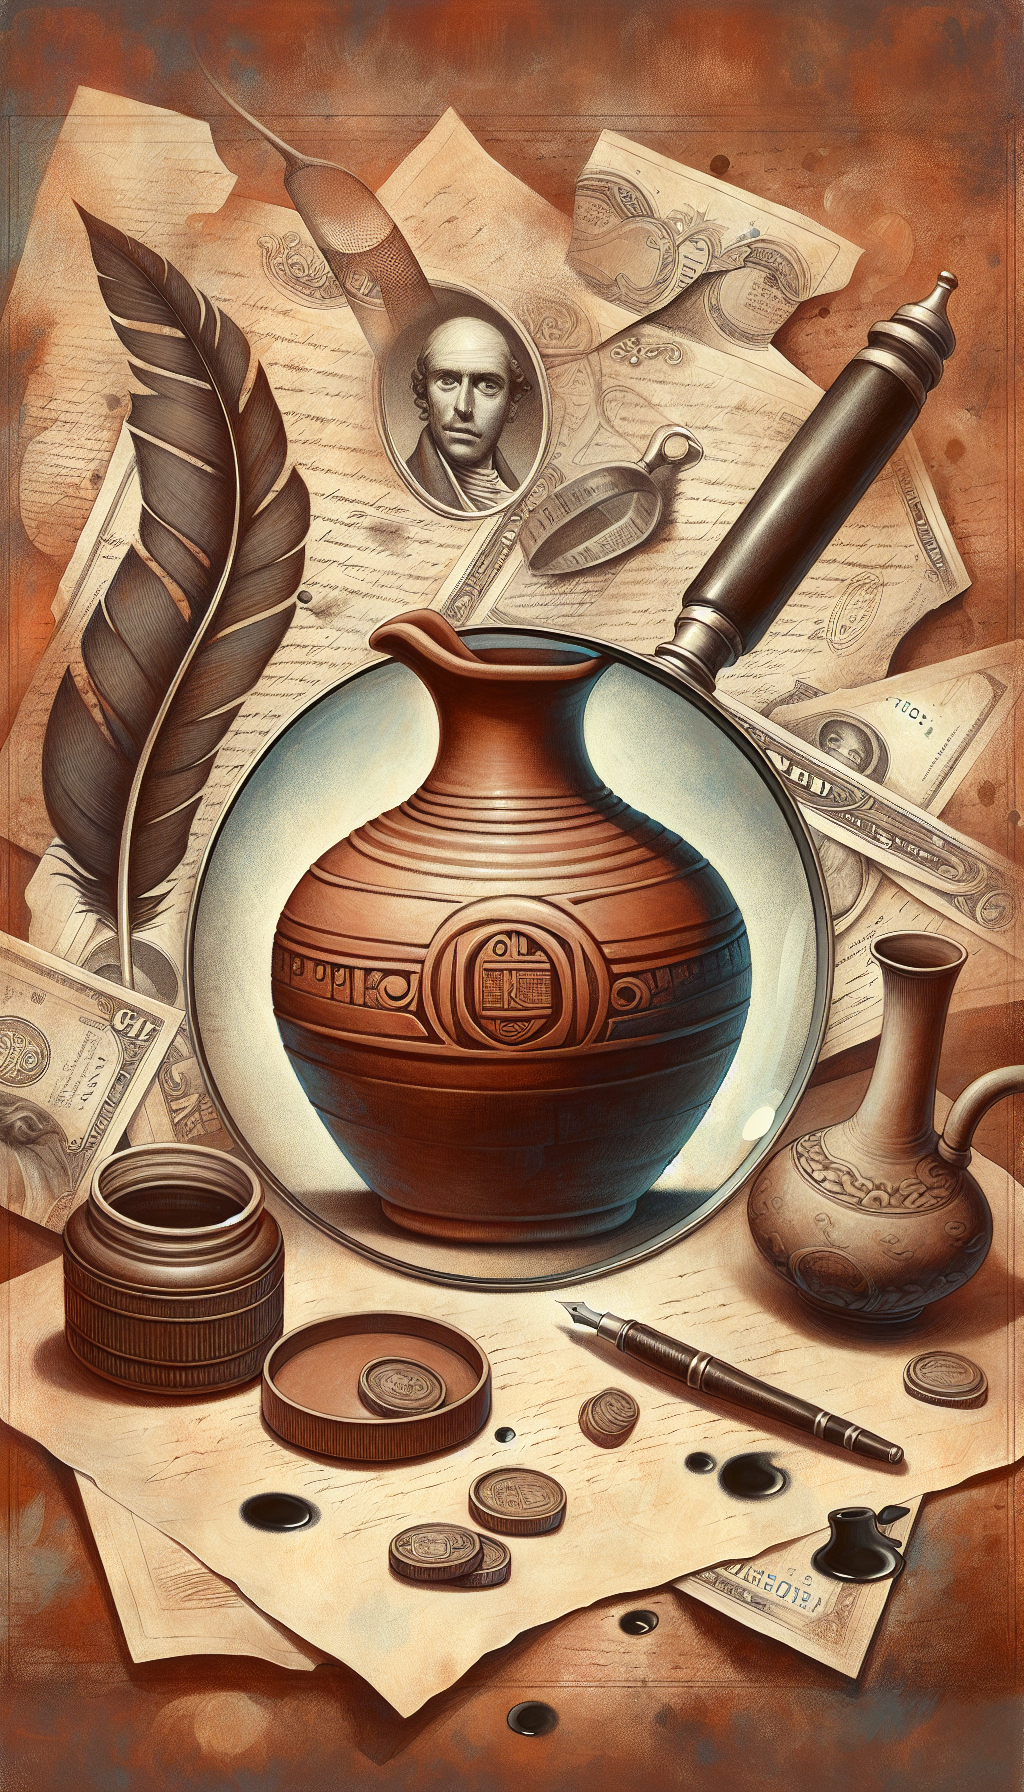 A vintage brown jug sits center frame against a parchment backdrop, a magnifying glass hovering above, revealing a clear, embossed maker's mark on its curved side. A quill and inkwell rest beside it, suggesting the jug's cherished history while subtle dollar symbols float upward from the jug, indicating its value. The style transitions from detailed realism around the jug to abstract sketches of currency and ink splatters.